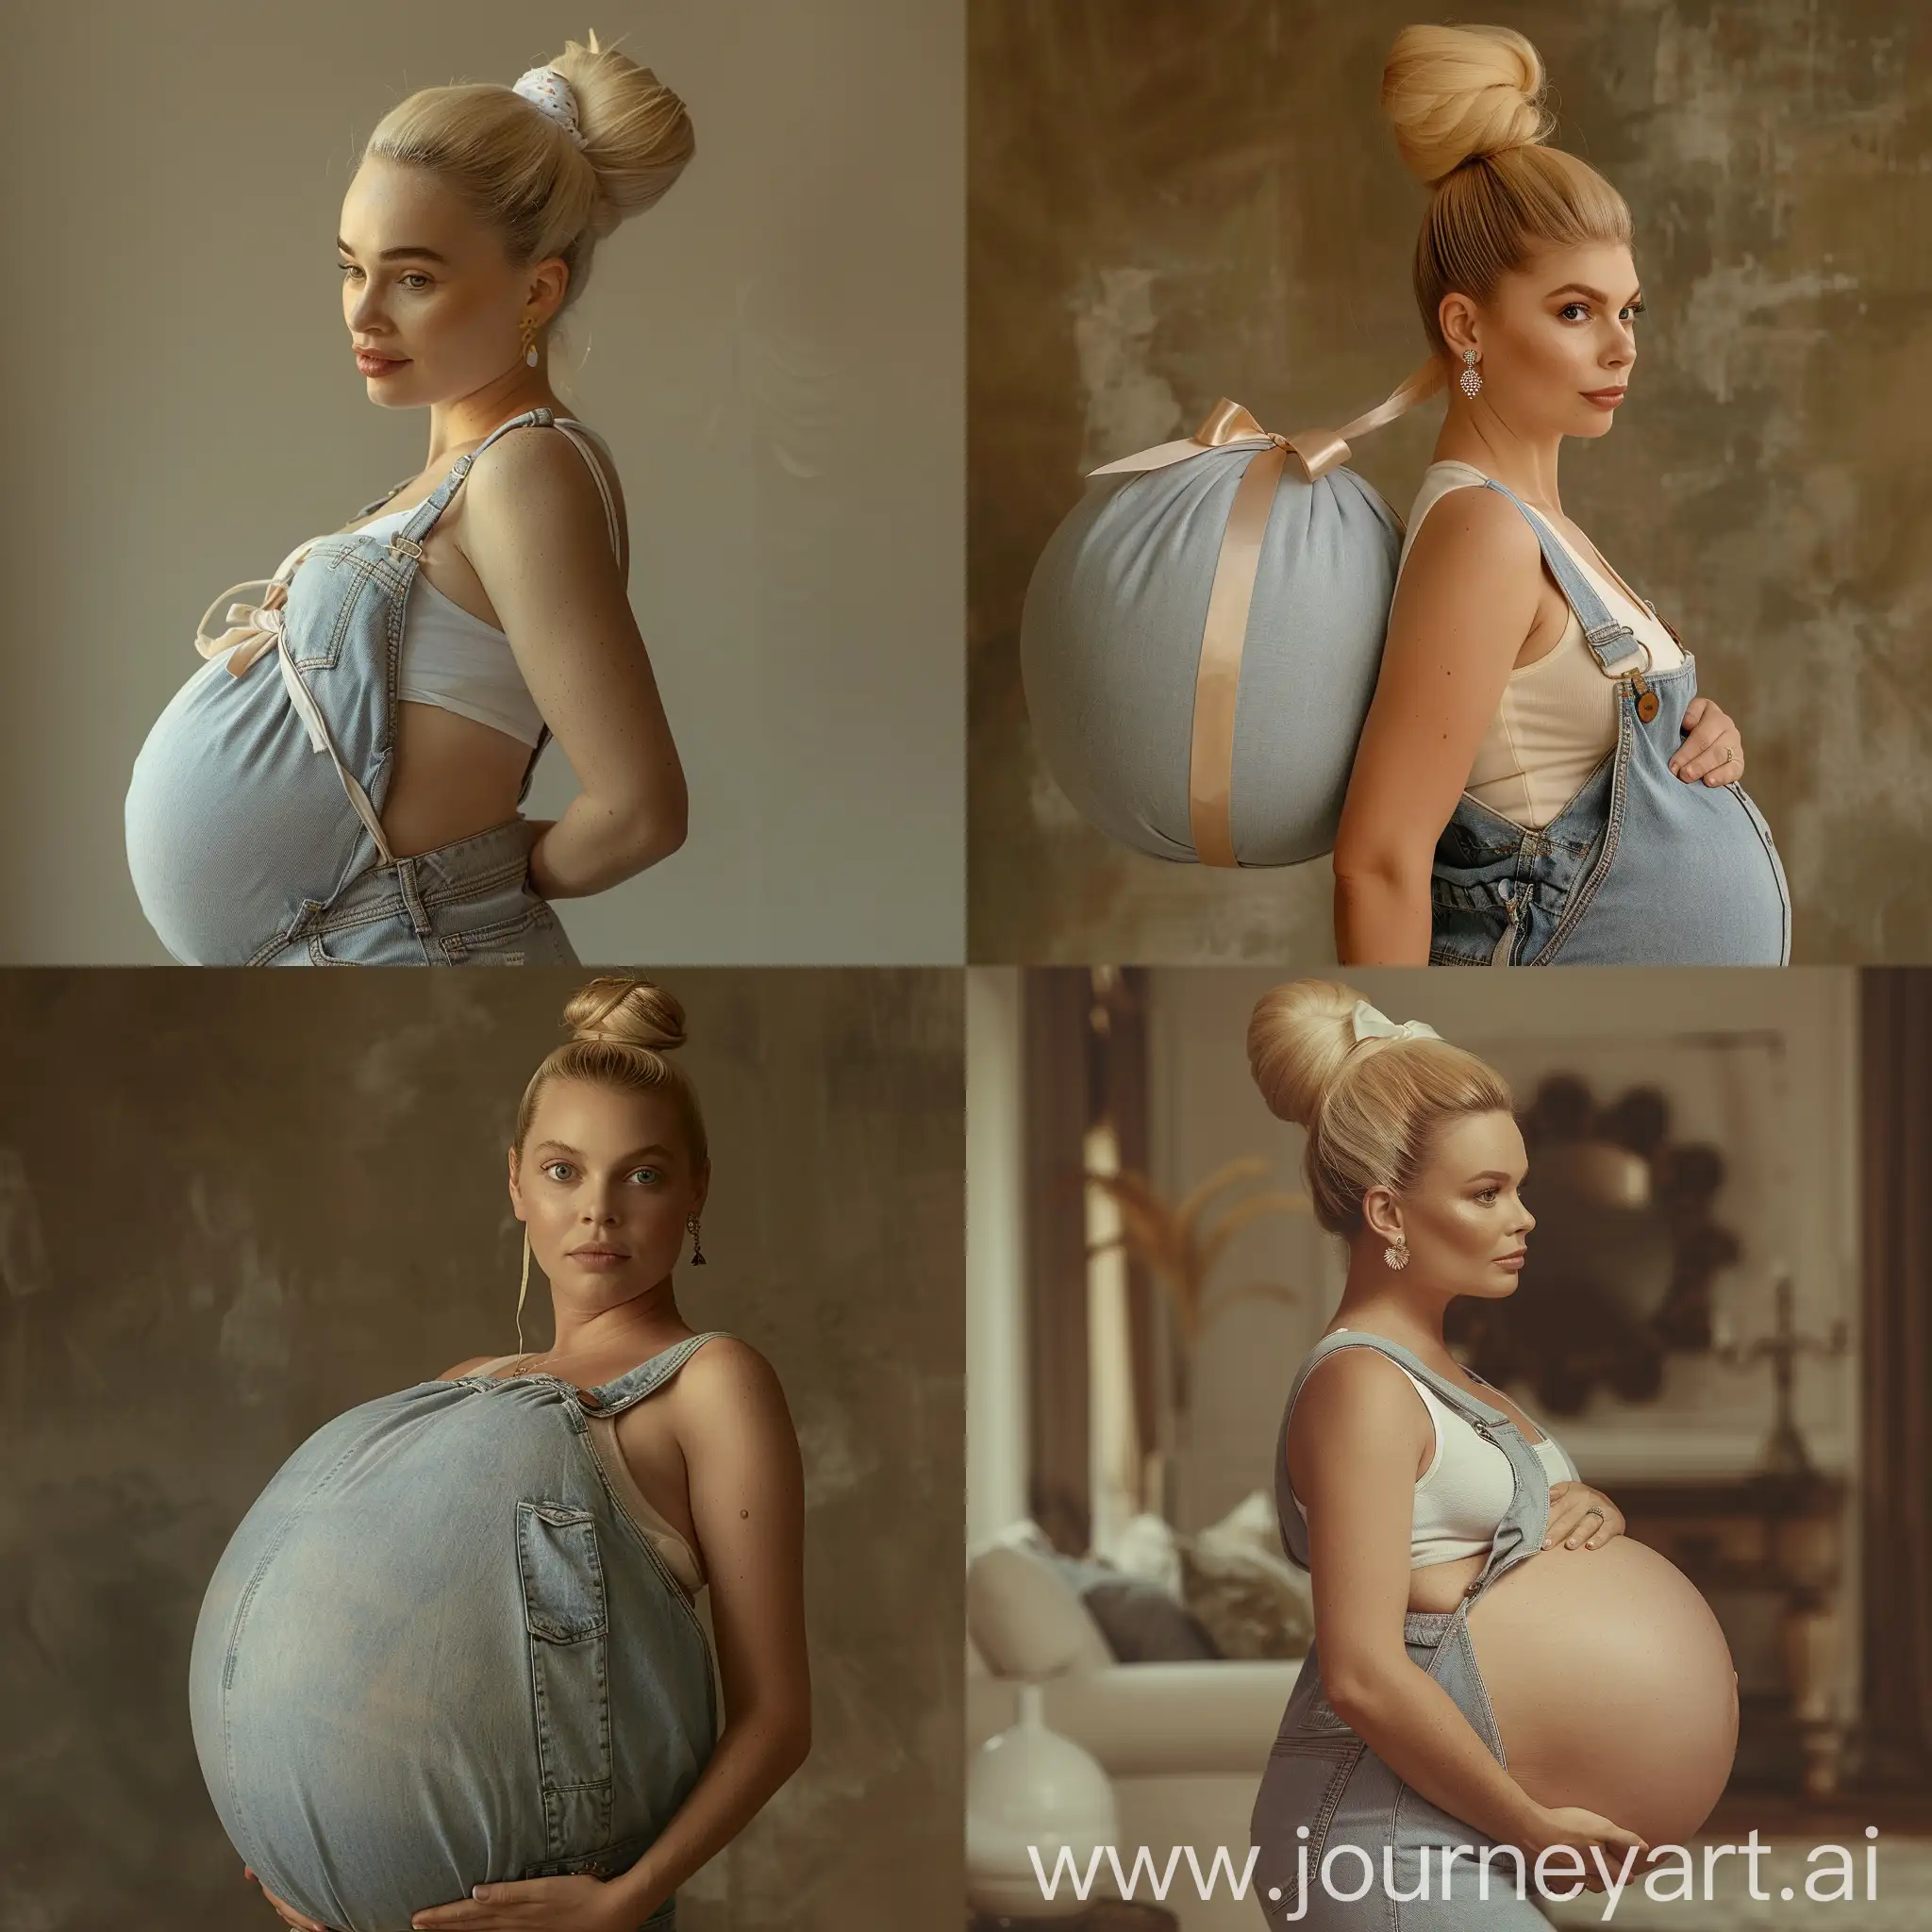 A captivating photograph of a radiant pregnant model. Her blonde hair is elegantly tied into a sleek bun, adorned with a delicate ribbon. Her overalls  and tank top covers her large 80-inch round belly as it swells with her expanding womb. With just a single statement earring on her ear, she exudes confidence as she strides through a contemporary photo studio. The warm, natural light enhances her radiant glow, making her an embodiment of beauty and strength.